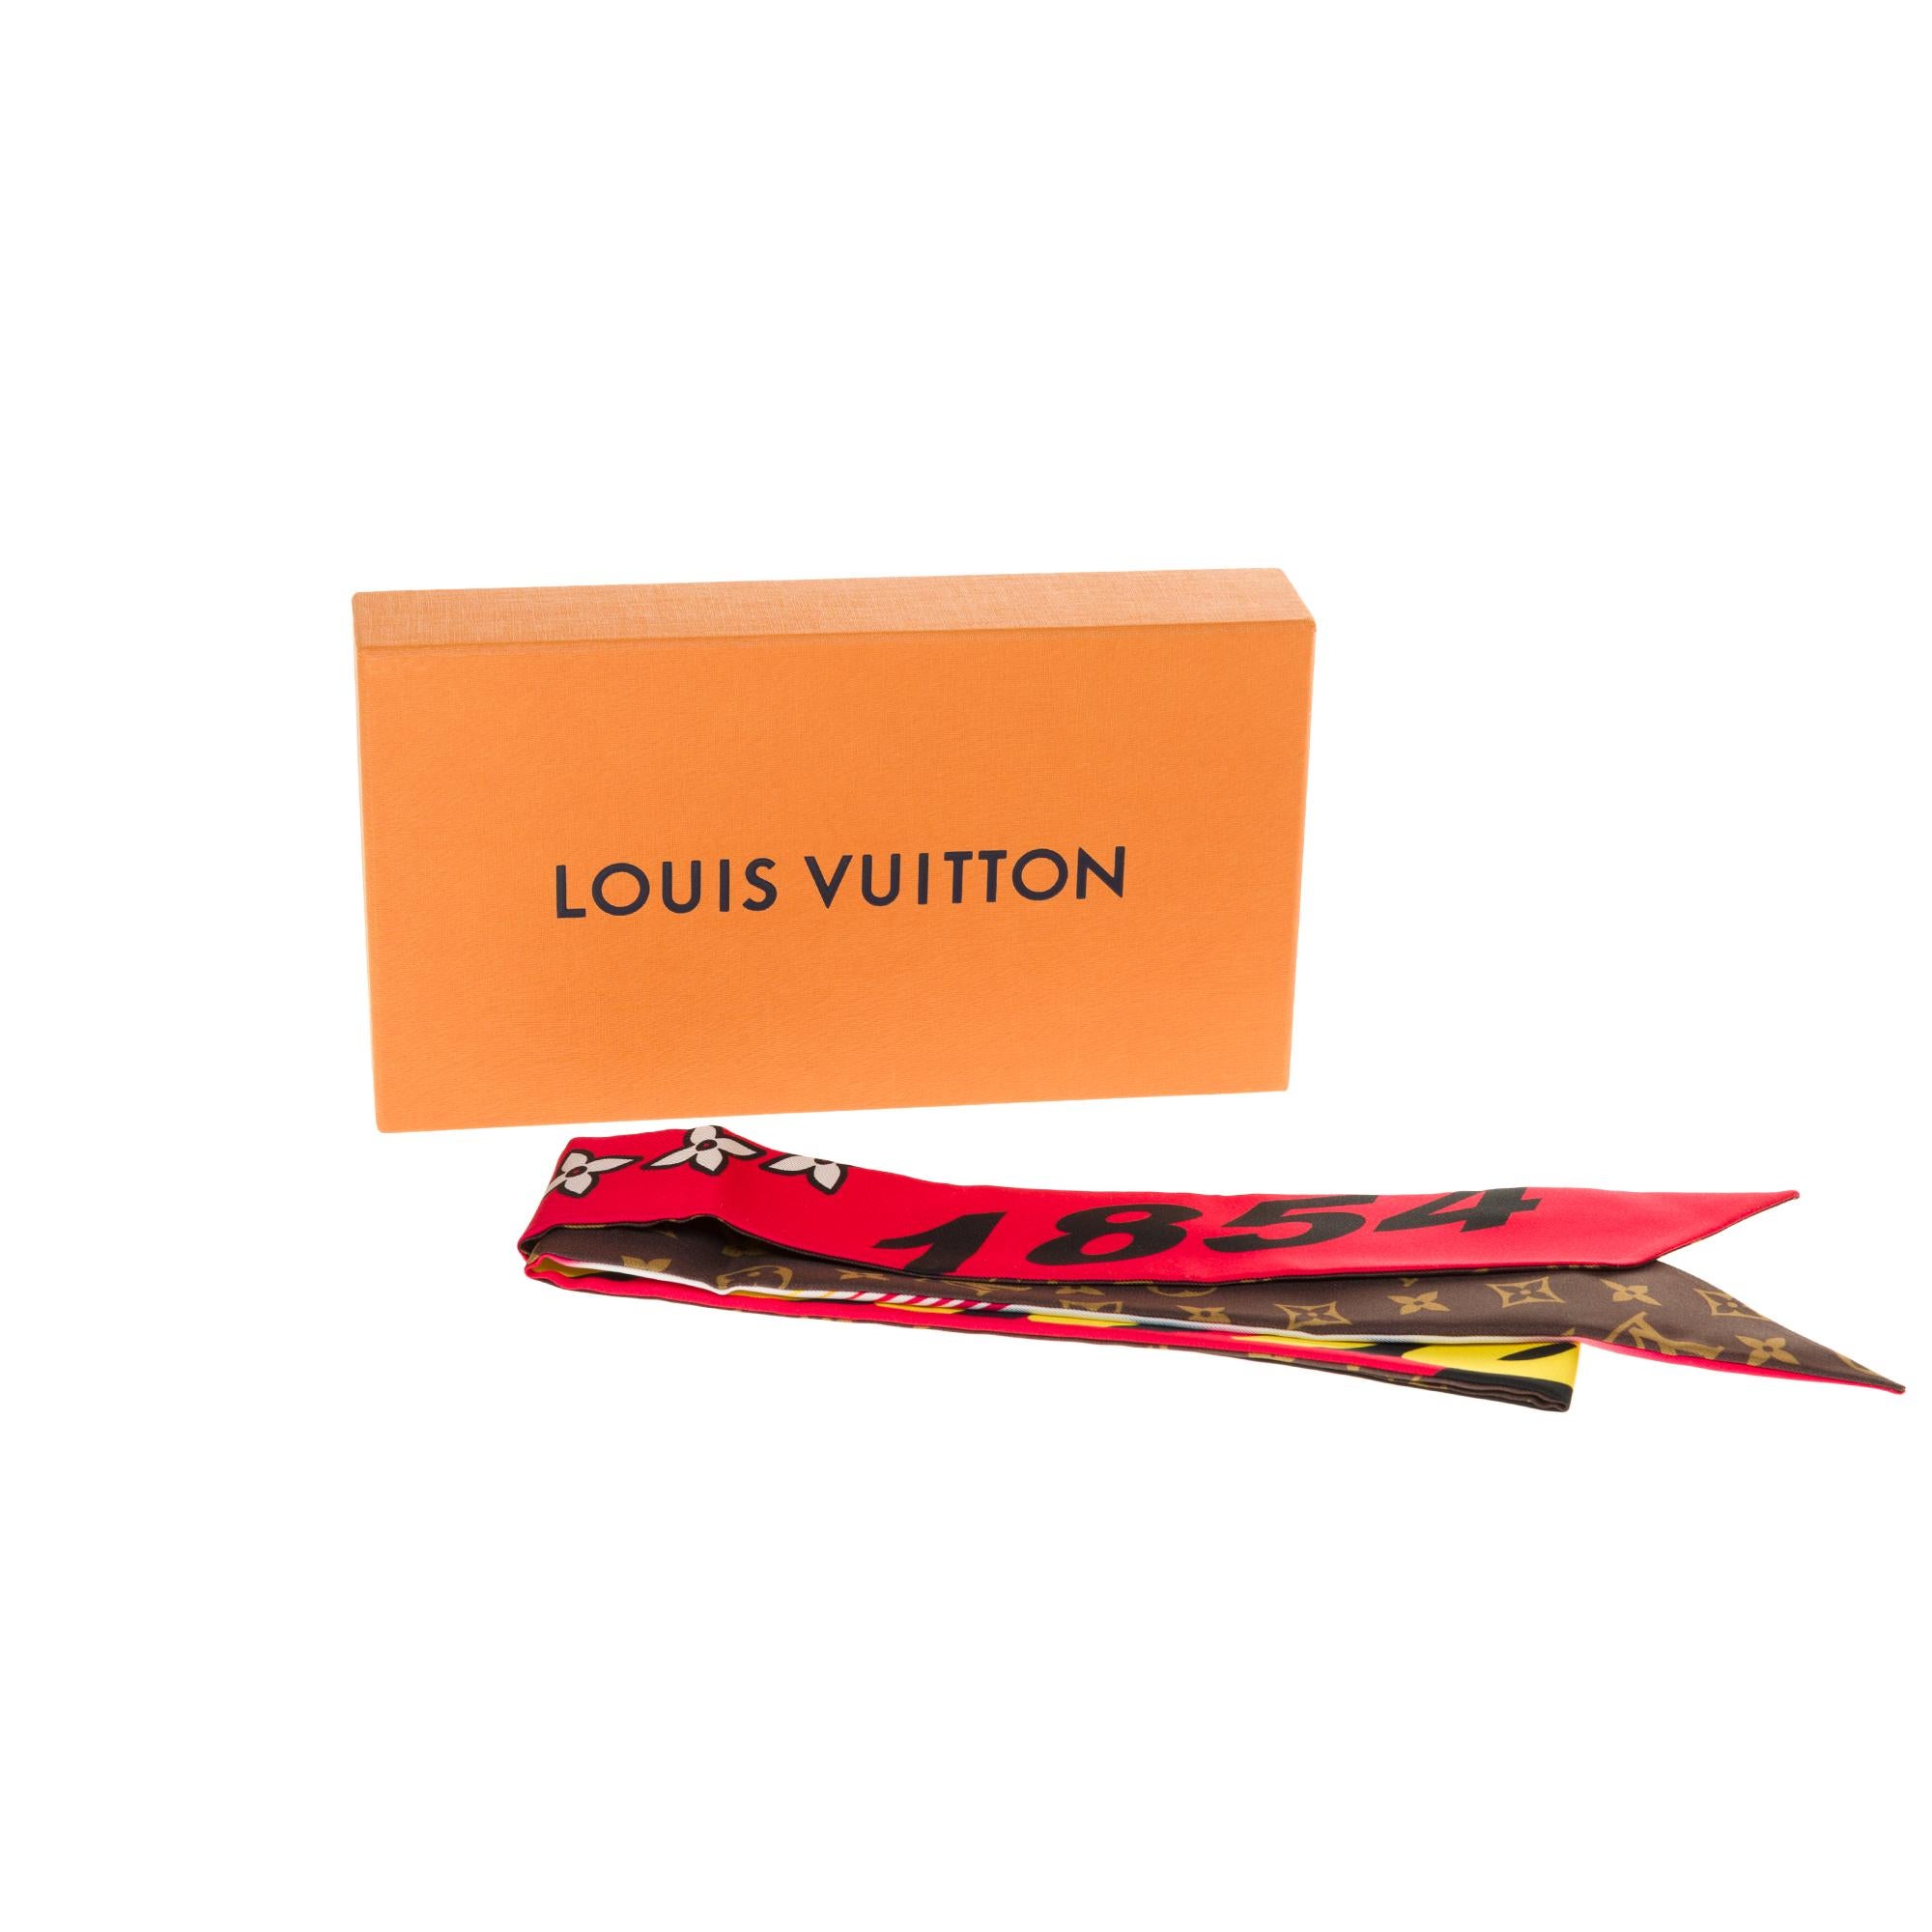 Women's Brand New/ Limited Edition/Collector/ Louis Vuitton Cruise 2017 Race collection